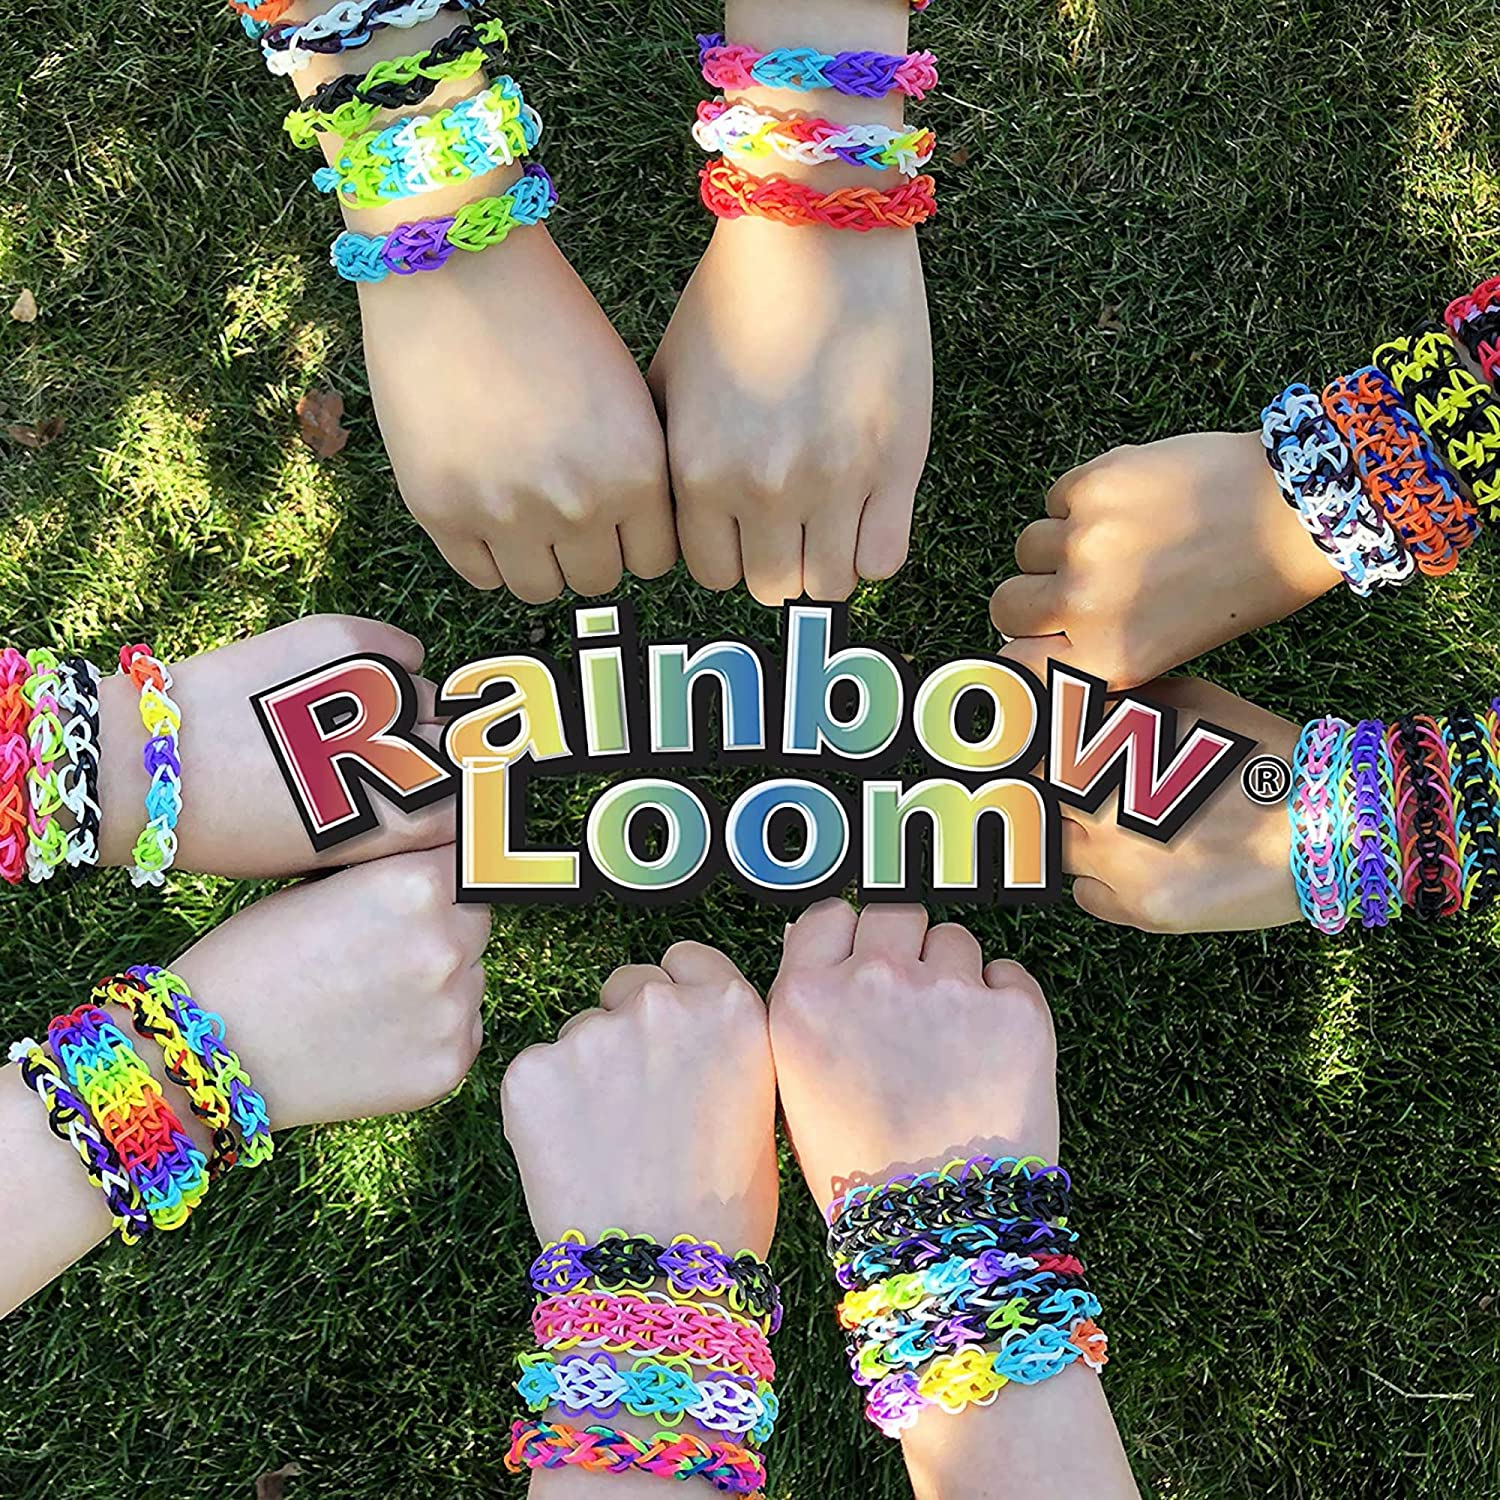 The Original Rainbow Loom – Little Lincoln's Toy Shop